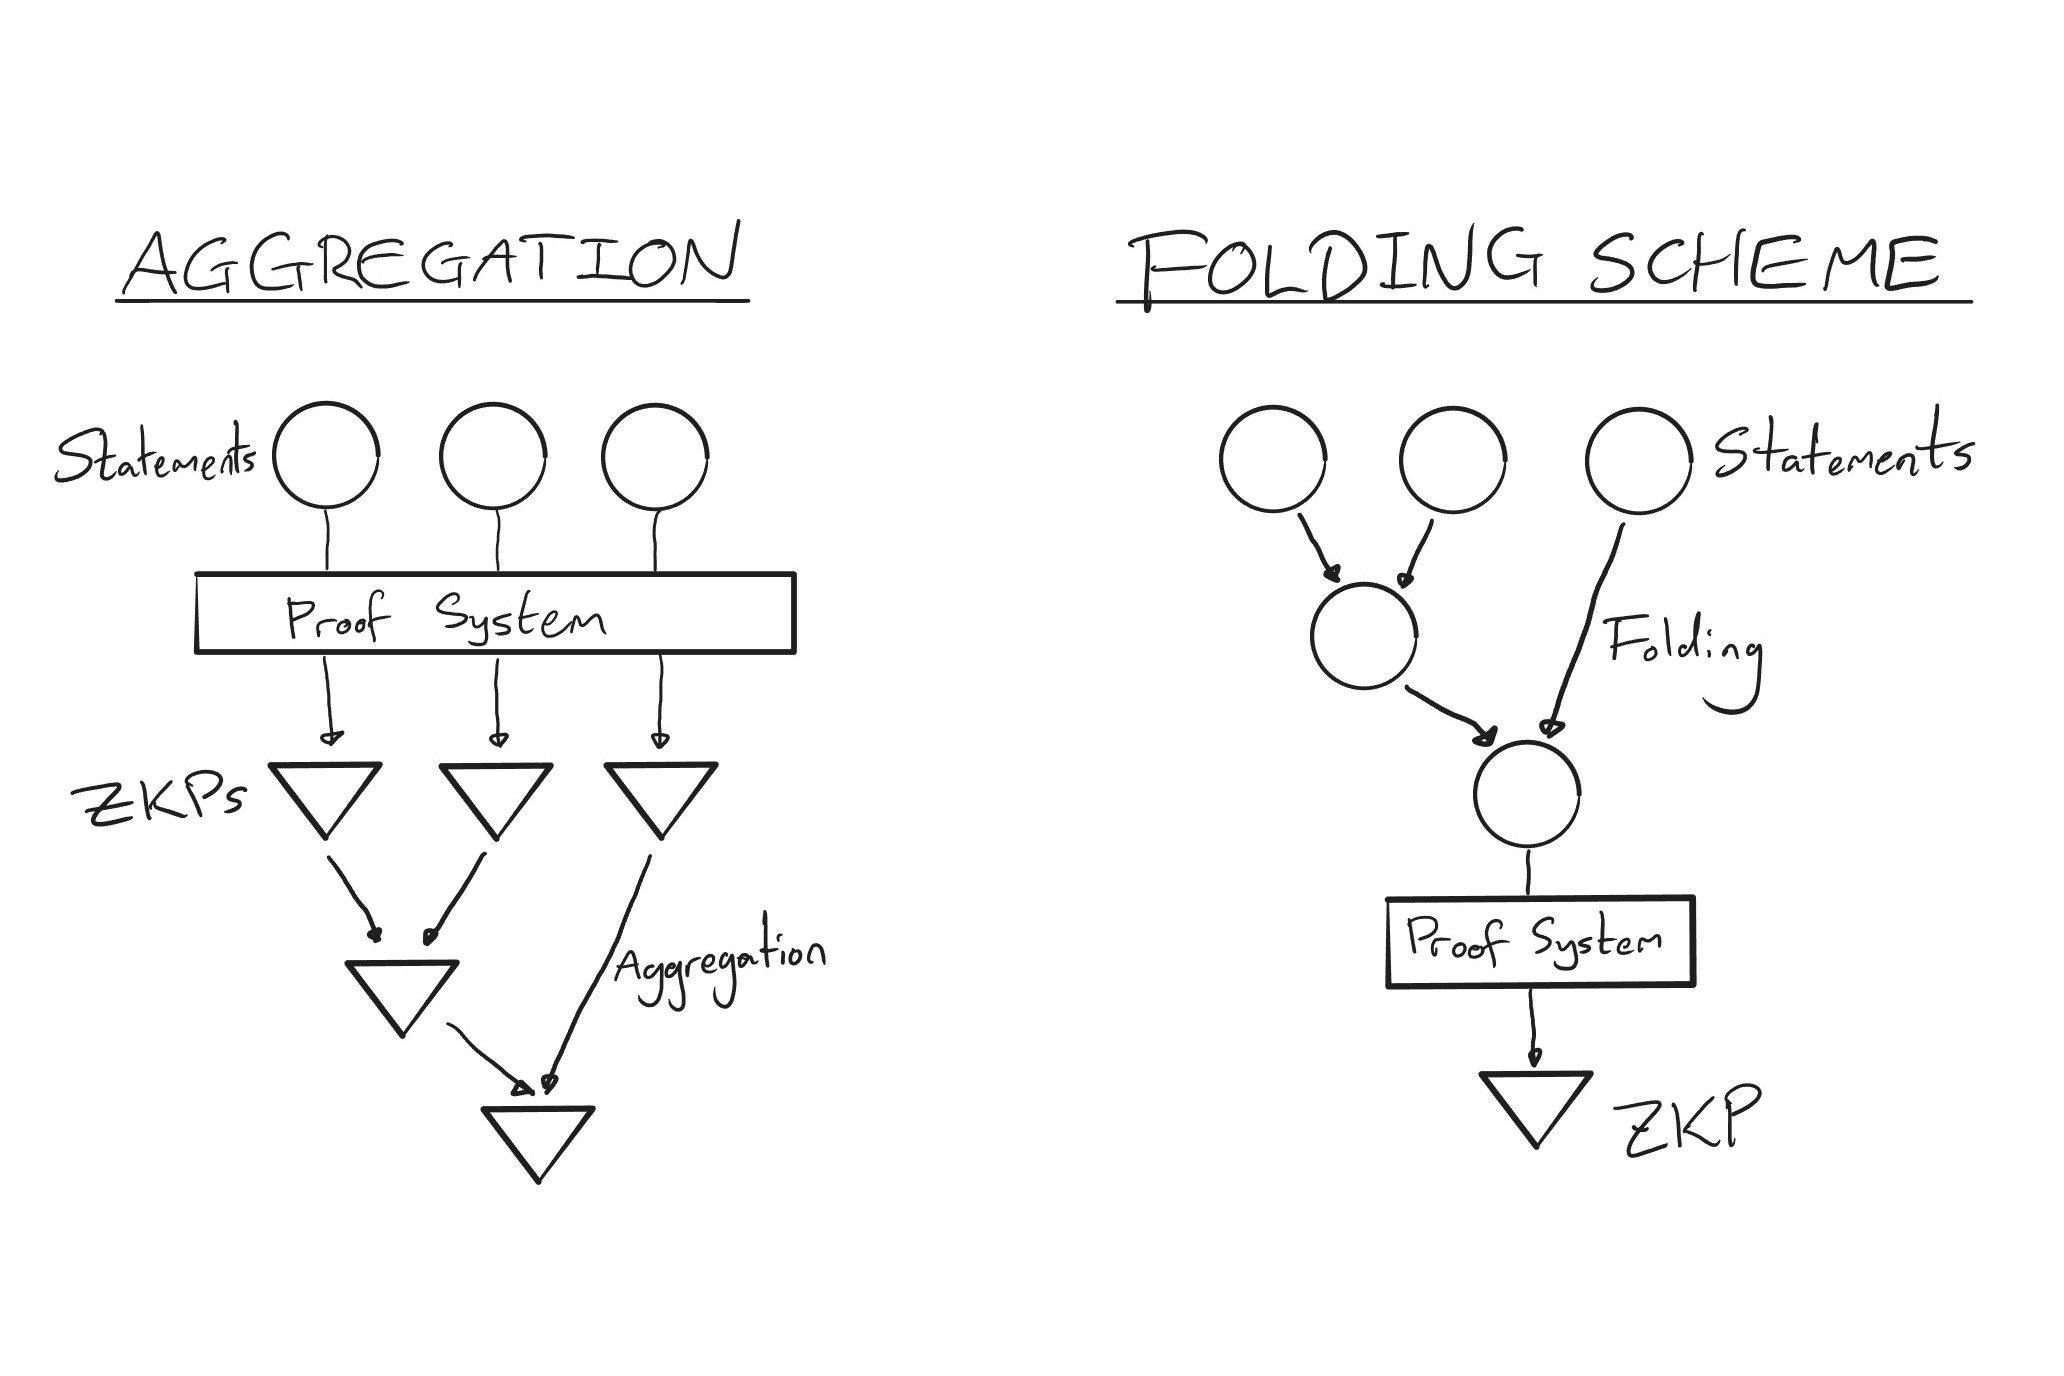 Classic proof aggregation (left) vs folding schemes (right)